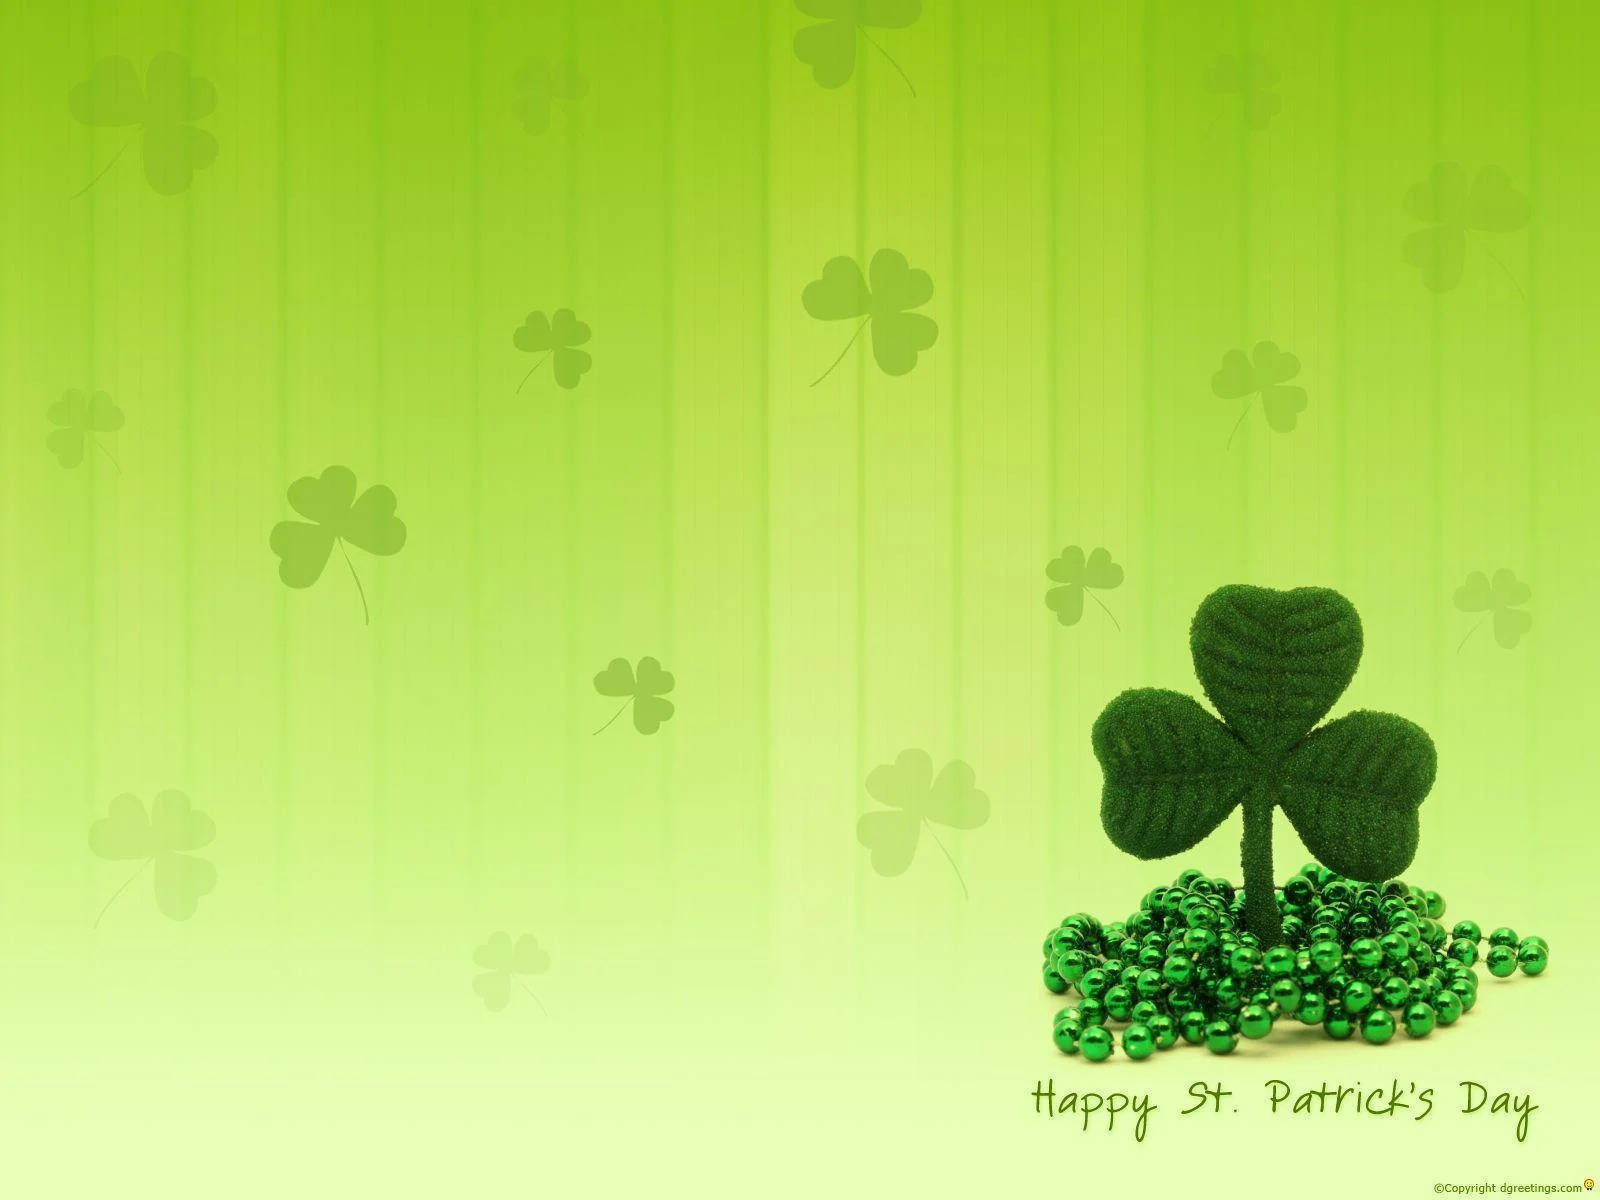 Saint Patrick’s Day With Clover Leaf